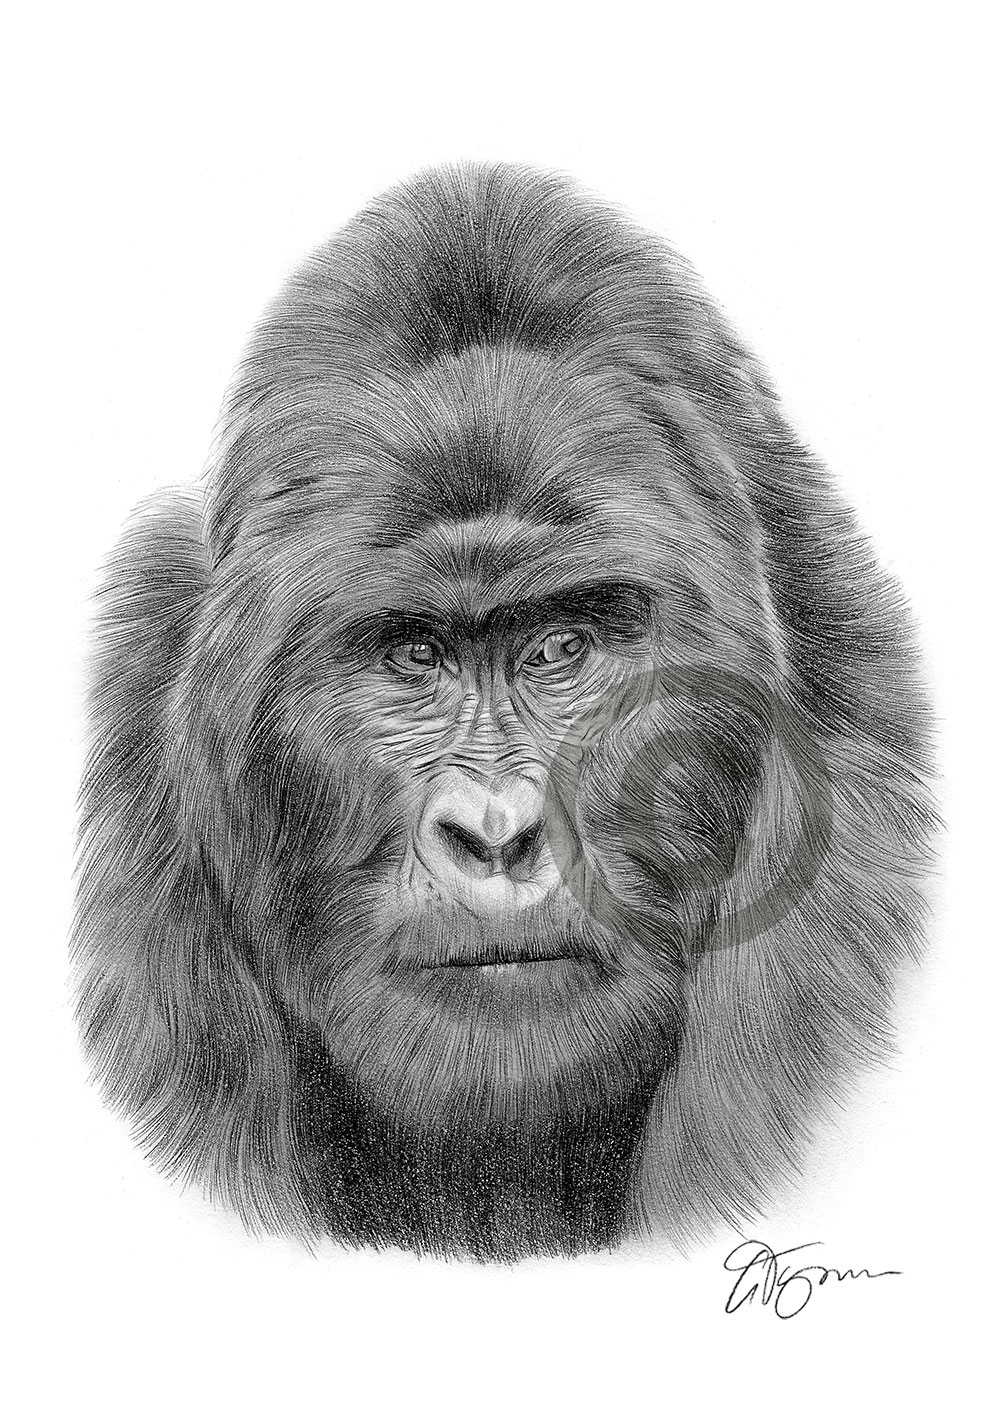 Pencil drawing of a mountain gorilla by artist Gary Tymon